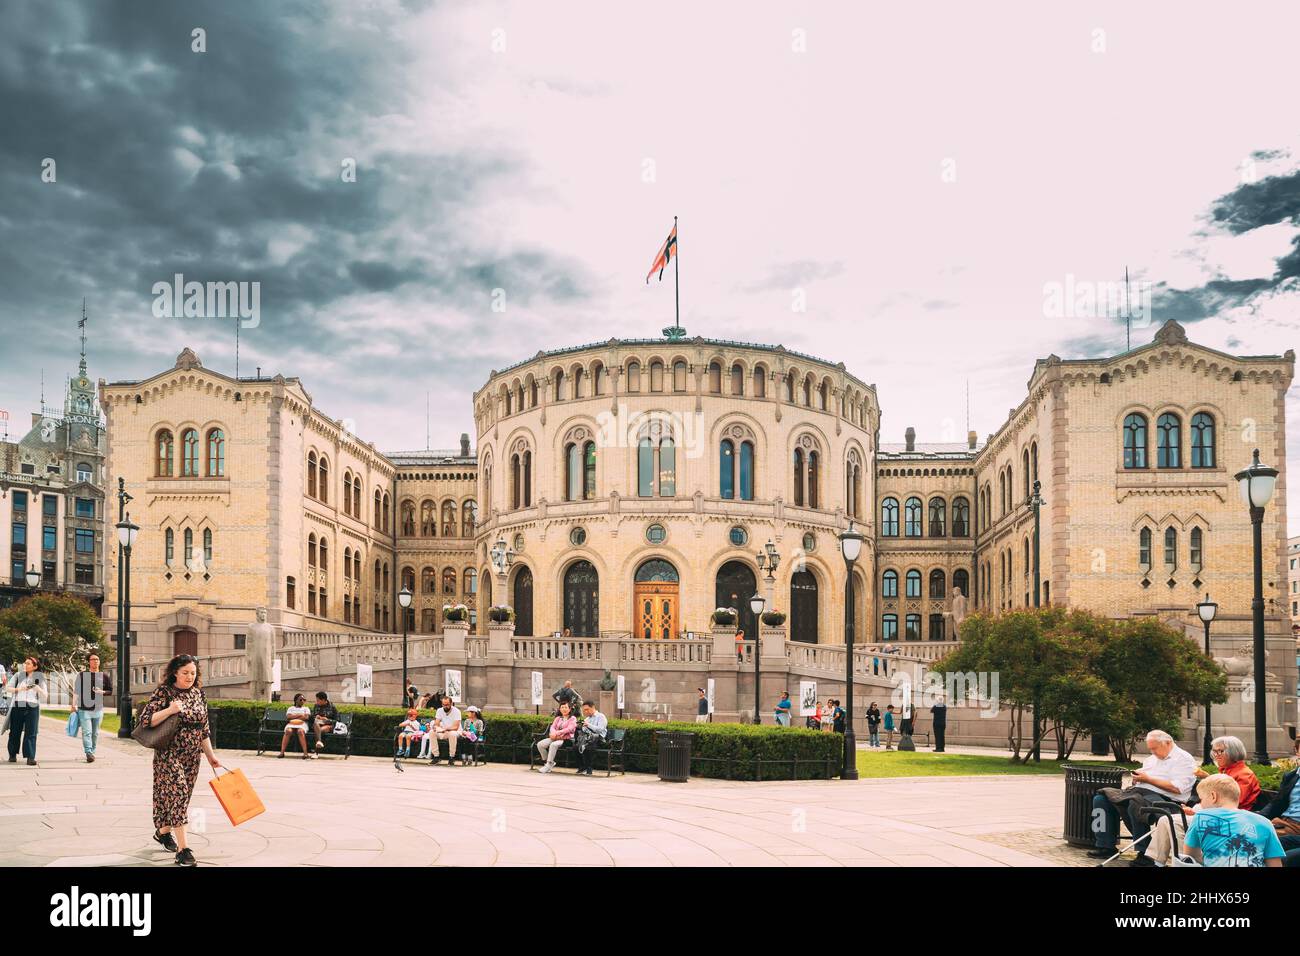 Oslo, Norway. People Walking Near Oslo Parliament. Storting building or Stortingsbygningen. Famous And Popular Place. Stock Photo